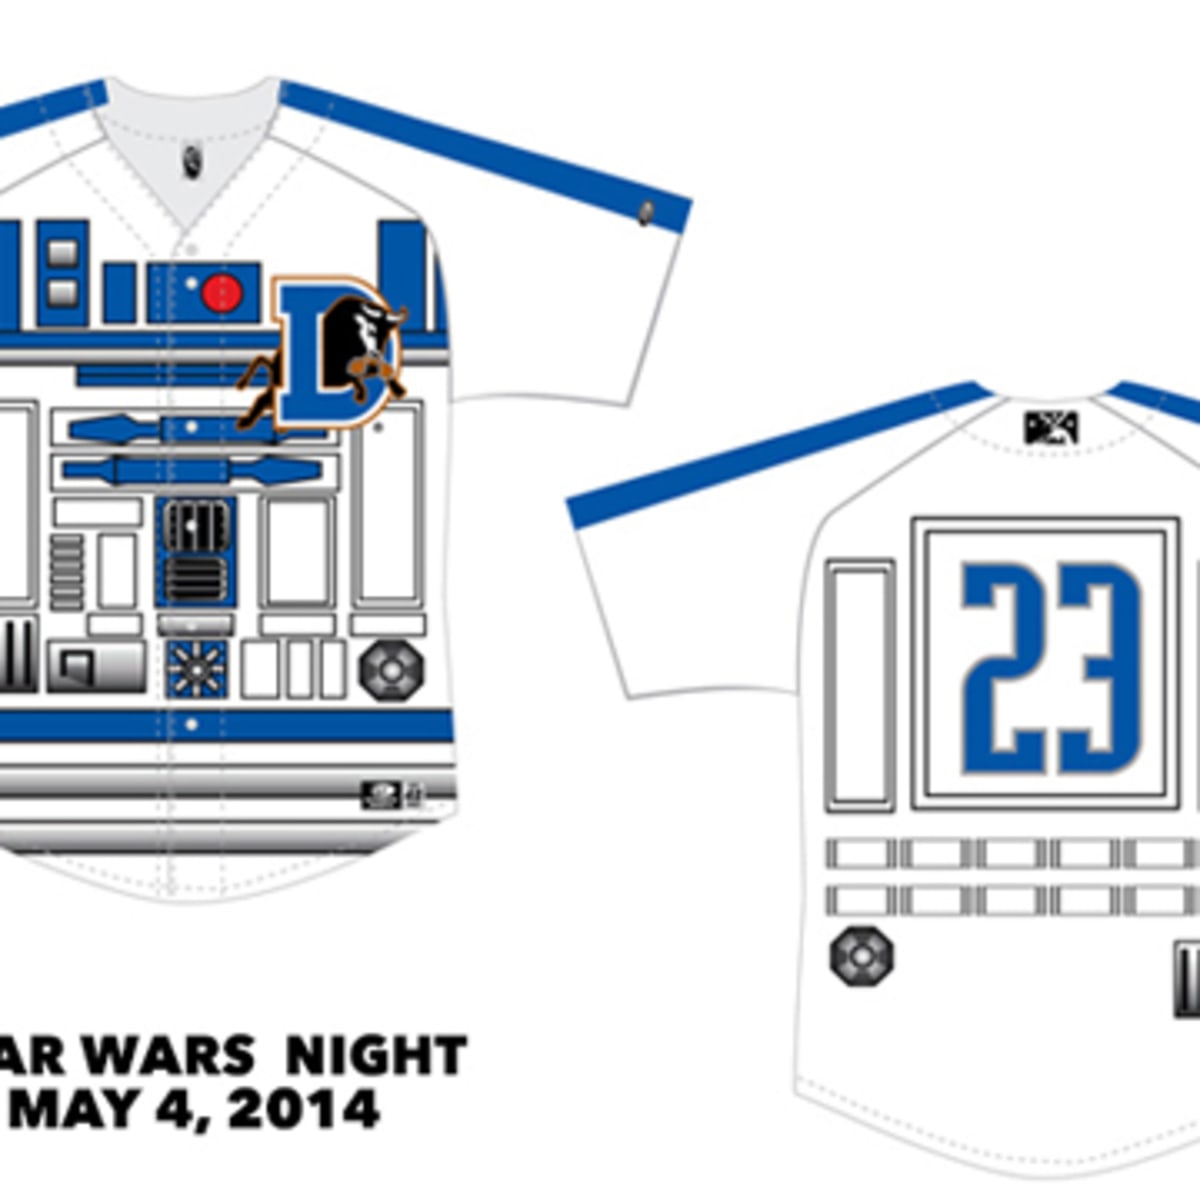 Durham Bulls on X: That's a rad shirt, man Replica jerseys & shirts  for Stranger Things Night Chapter 4 at the DBAP are now available from the  Ballpark Corner Store! Replica Jerseys:  Shirts